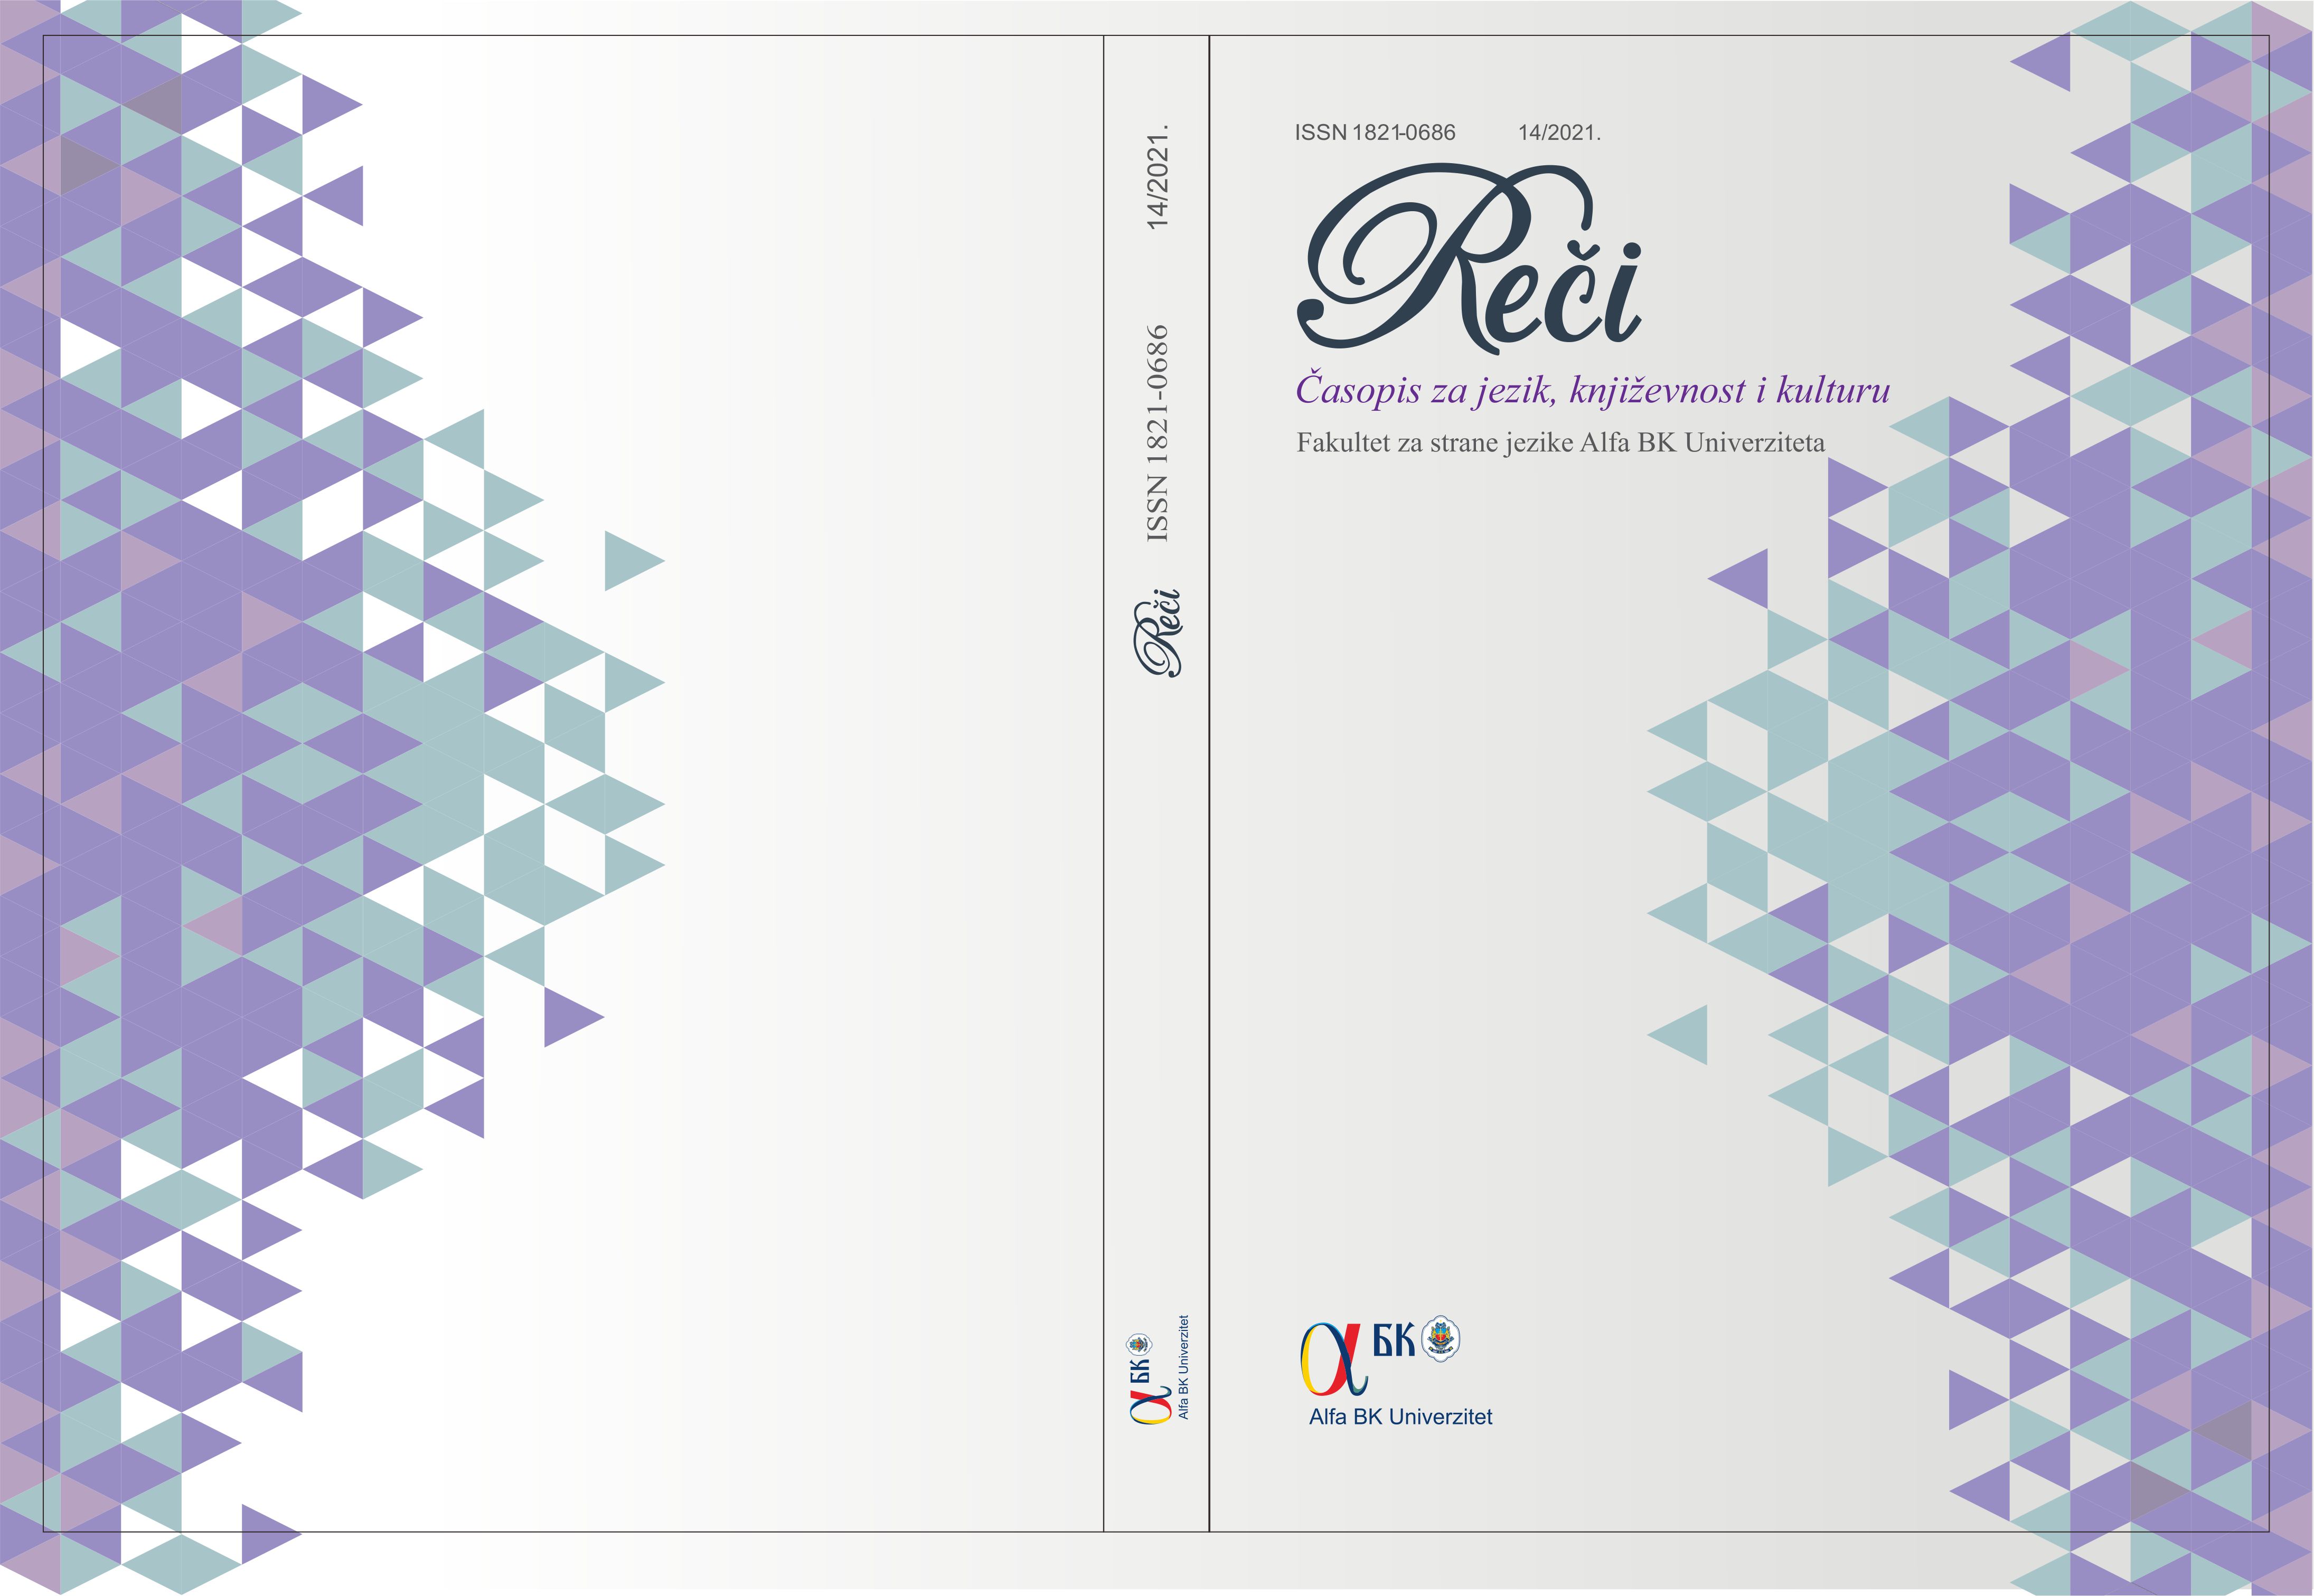 					View No. 14 (2021): Reči, Journal of Language, Literature and Culture
				